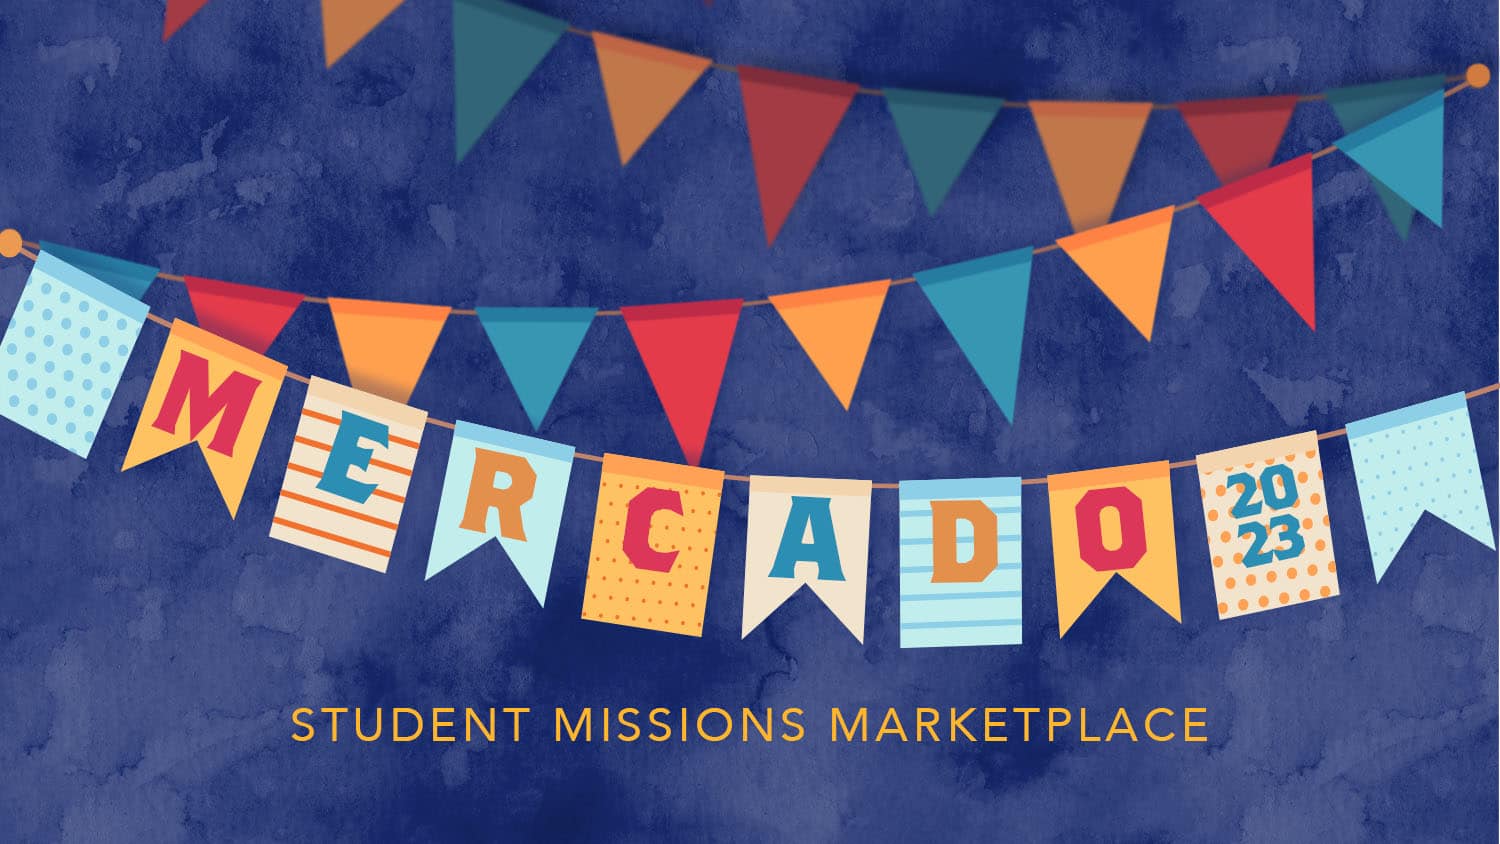 Mercado: The Student Missions Marketplace